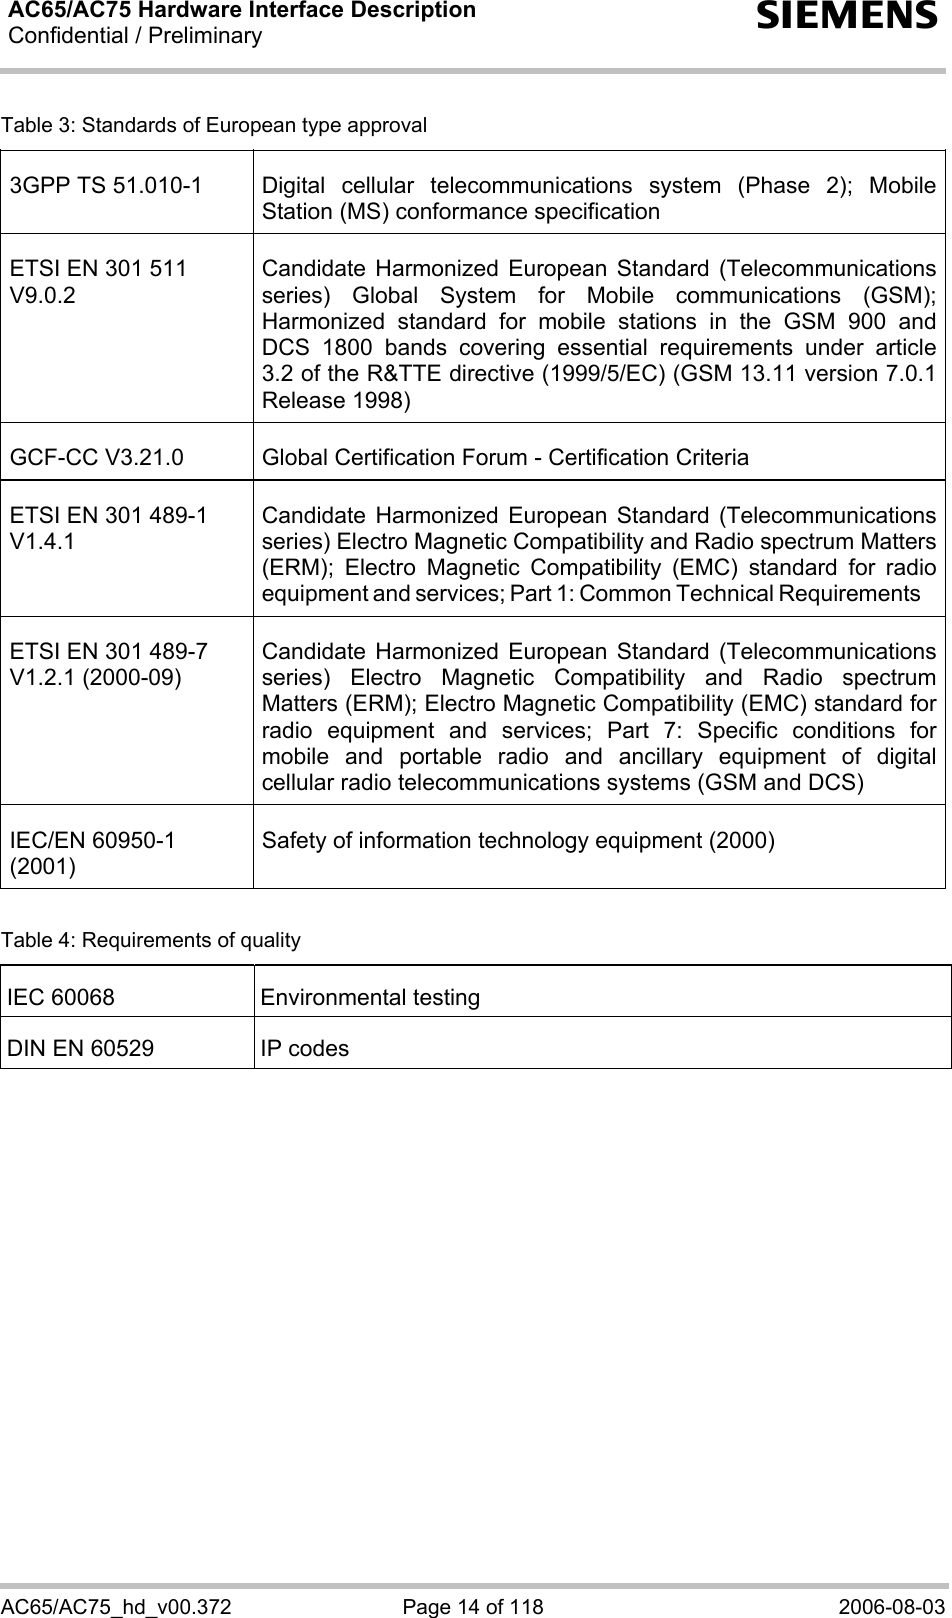 AC65/AC75 Hardware Interface Description Confidential / Preliminary  s AC65/AC75_hd_v00.372  Page 14 of 118  2006-08-03 Table 3: Standards of European type approval 3GPP TS 51.010-1  Digital cellular telecommunications system (Phase 2); Mobile Station (MS) conformance specification ETSI EN 301 511 V9.0.2 Candidate Harmonized European Standard (Telecommunications series) Global System for Mobile communications (GSM); Harmonized standard for mobile stations in the GSM 900 and DCS 1800 bands covering essential requirements under article 3.2 of the R&amp;TTE directive (1999/5/EC) (GSM 13.11 version 7.0.1 Release 1998) GCF-CC V3.21.0  Global Certification Forum - Certification Criteria ETSI EN 301 489-1 V1.4.1 Candidate Harmonized European Standard (Telecommunications series) Electro Magnetic Compatibility and Radio spectrum Matters (ERM); Electro Magnetic Compatibility (EMC) standard for radio equipment and services; Part 1: Common Technical Requirements ETSI EN 301 489-7 V1.2.1 (2000-09) Candidate Harmonized European Standard (Telecommunications series) Electro Magnetic Compatibility and Radio spectrum Matters (ERM); Electro Magnetic Compatibility (EMC) standard for radio equipment and services; Part 7: Specific conditions for mobile and portable radio and ancillary equipment of digital cellular radio telecommunications systems (GSM and DCS) IEC/EN 60950-1 (2001) Safety of information technology equipment (2000)  Table 4: Requirements of quality IEC 60068  Environmental testing DIN EN 60529  IP codes     